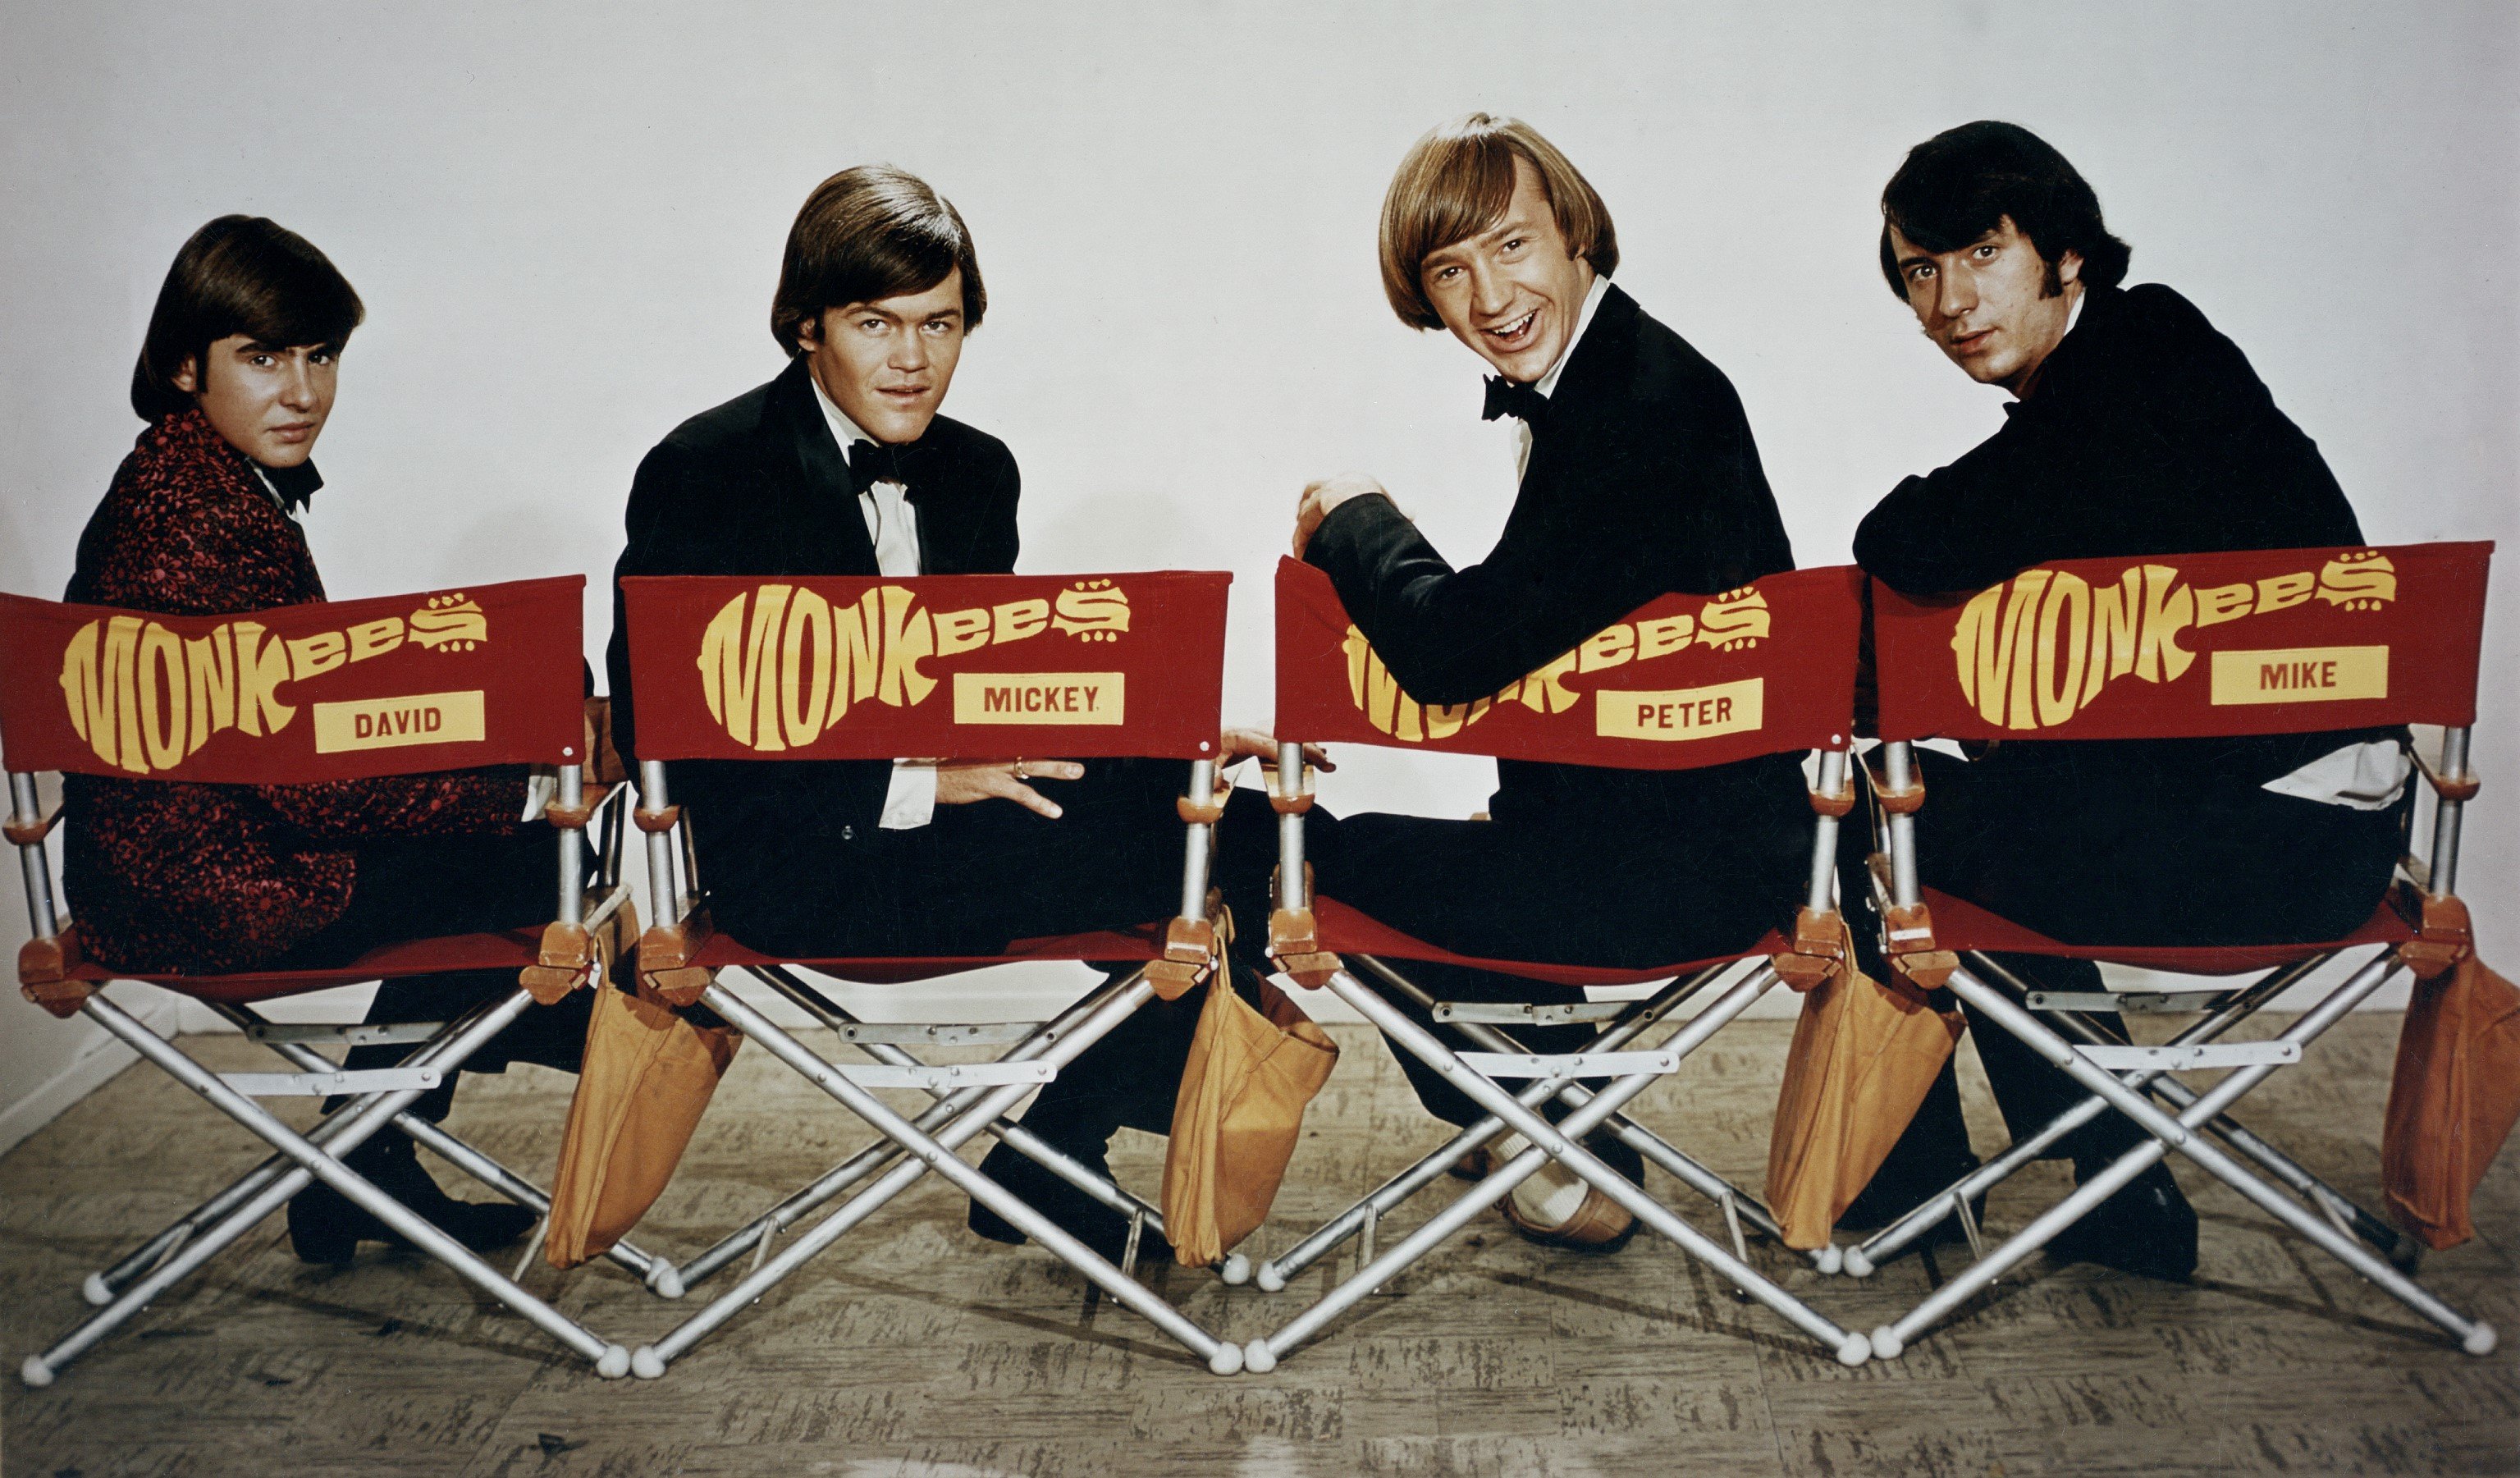 The Monkees' Davy Jones, Micky Dolenz, Peter Tork, and Mike Nesmith sitting in chairs